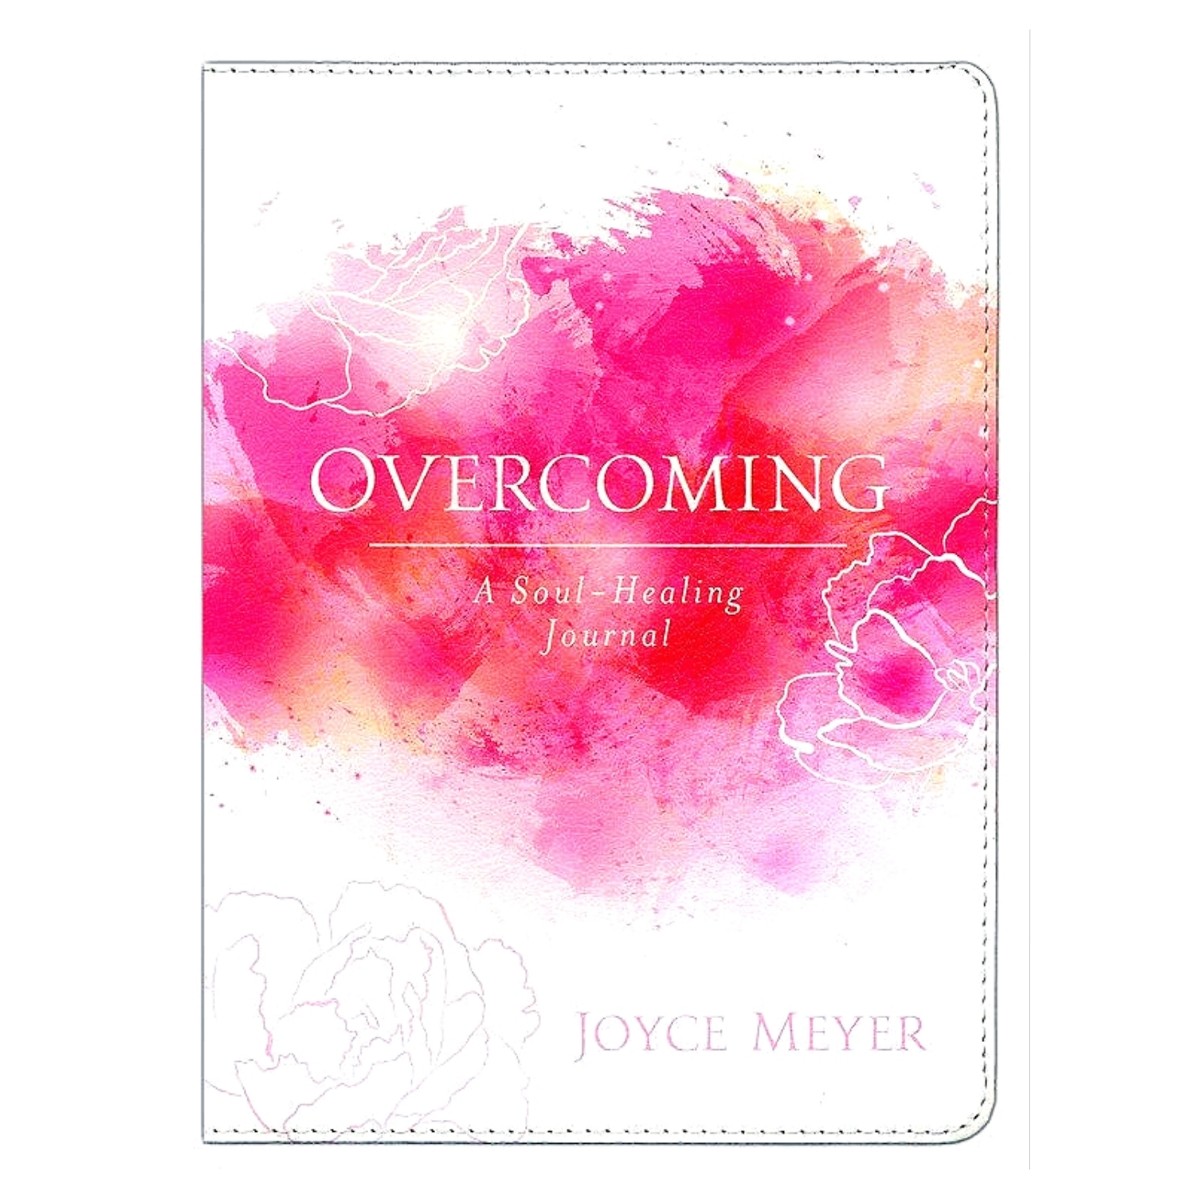 For Her. Overcoming: A Soul-Healing Journal